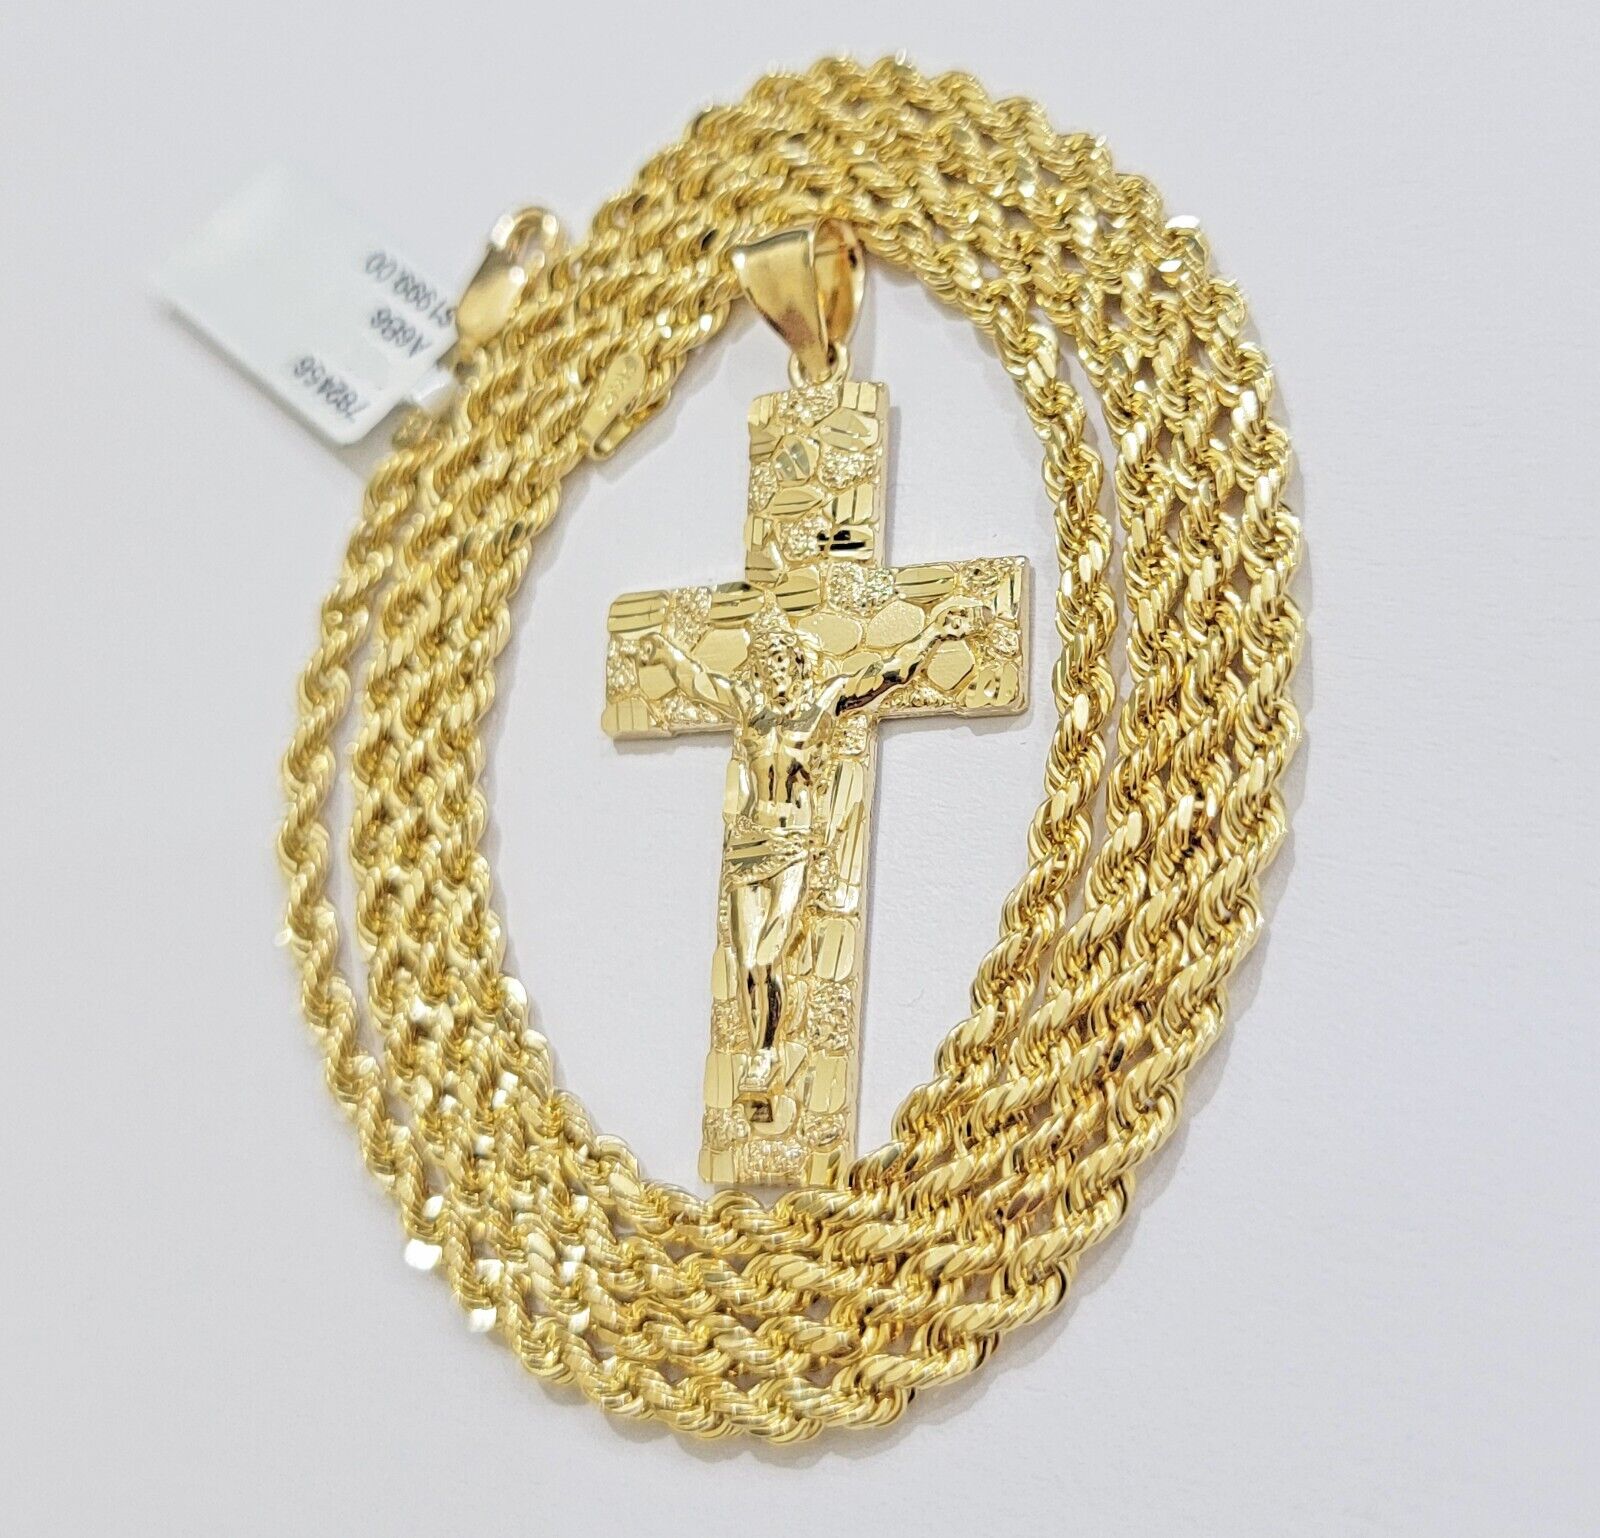 10k Yellow Gold Rope Chain Nugget Cross Charm Set 22 Inch necklace pendant, REAL